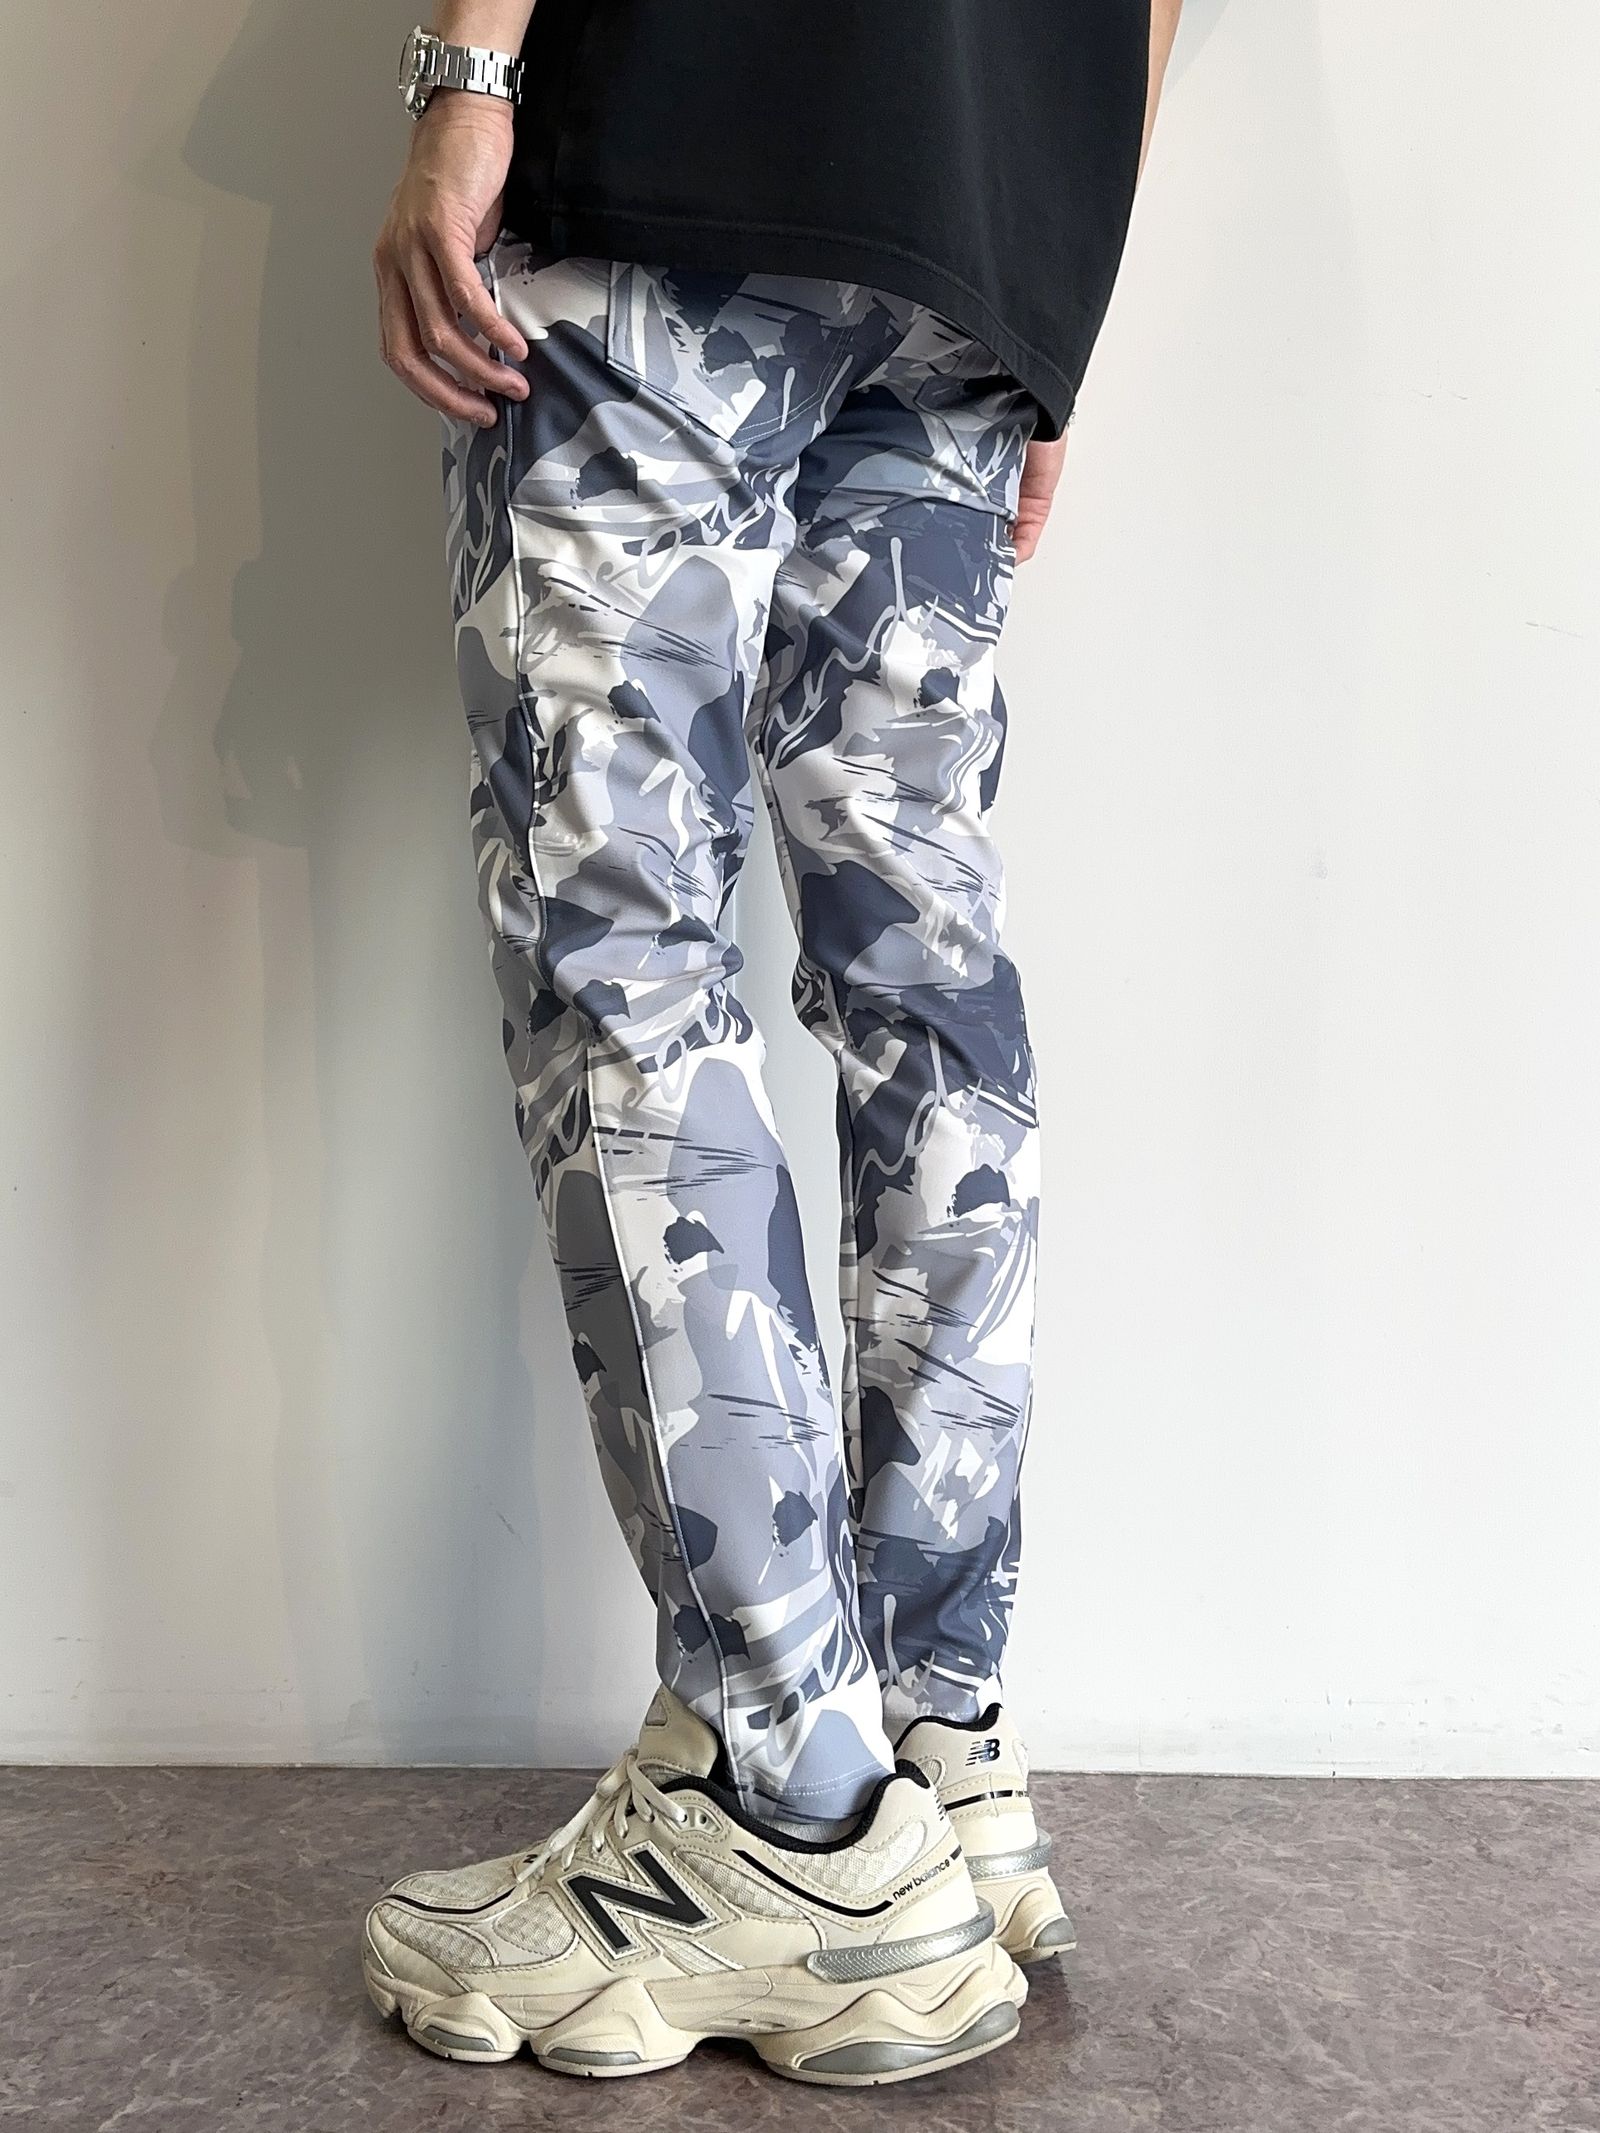 RESOUND CLOTHING - CHRIS EASY TUCK PANTS / RC29-ST-016T / カモ柄